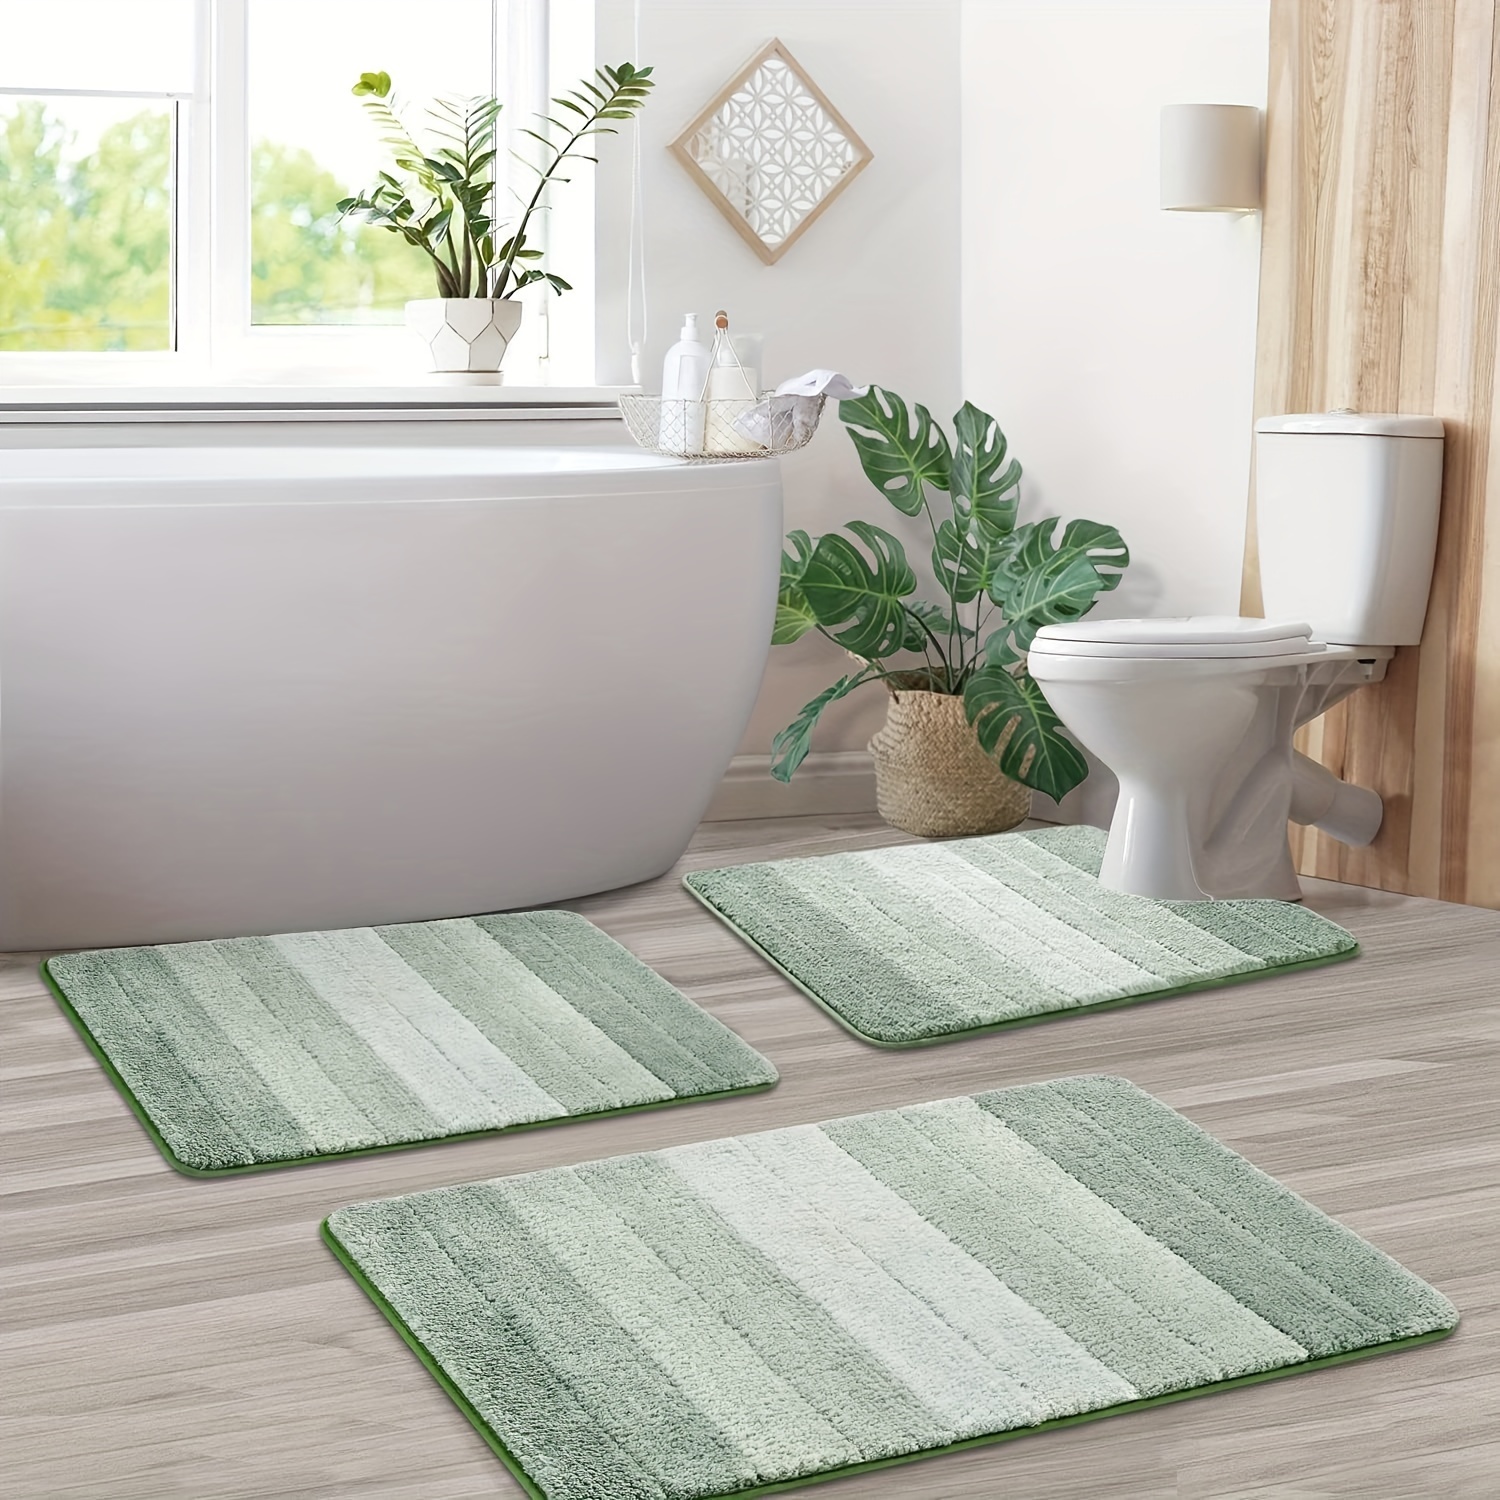 

3-piece Luxury Microfiber Bathroom Rug Set - Ultra Soft, Quick-dry & Absorbent Mats With U-shaped Contour For Toilet - Non-slip, Machine Washable For Bedroom, Living Room & Entryway